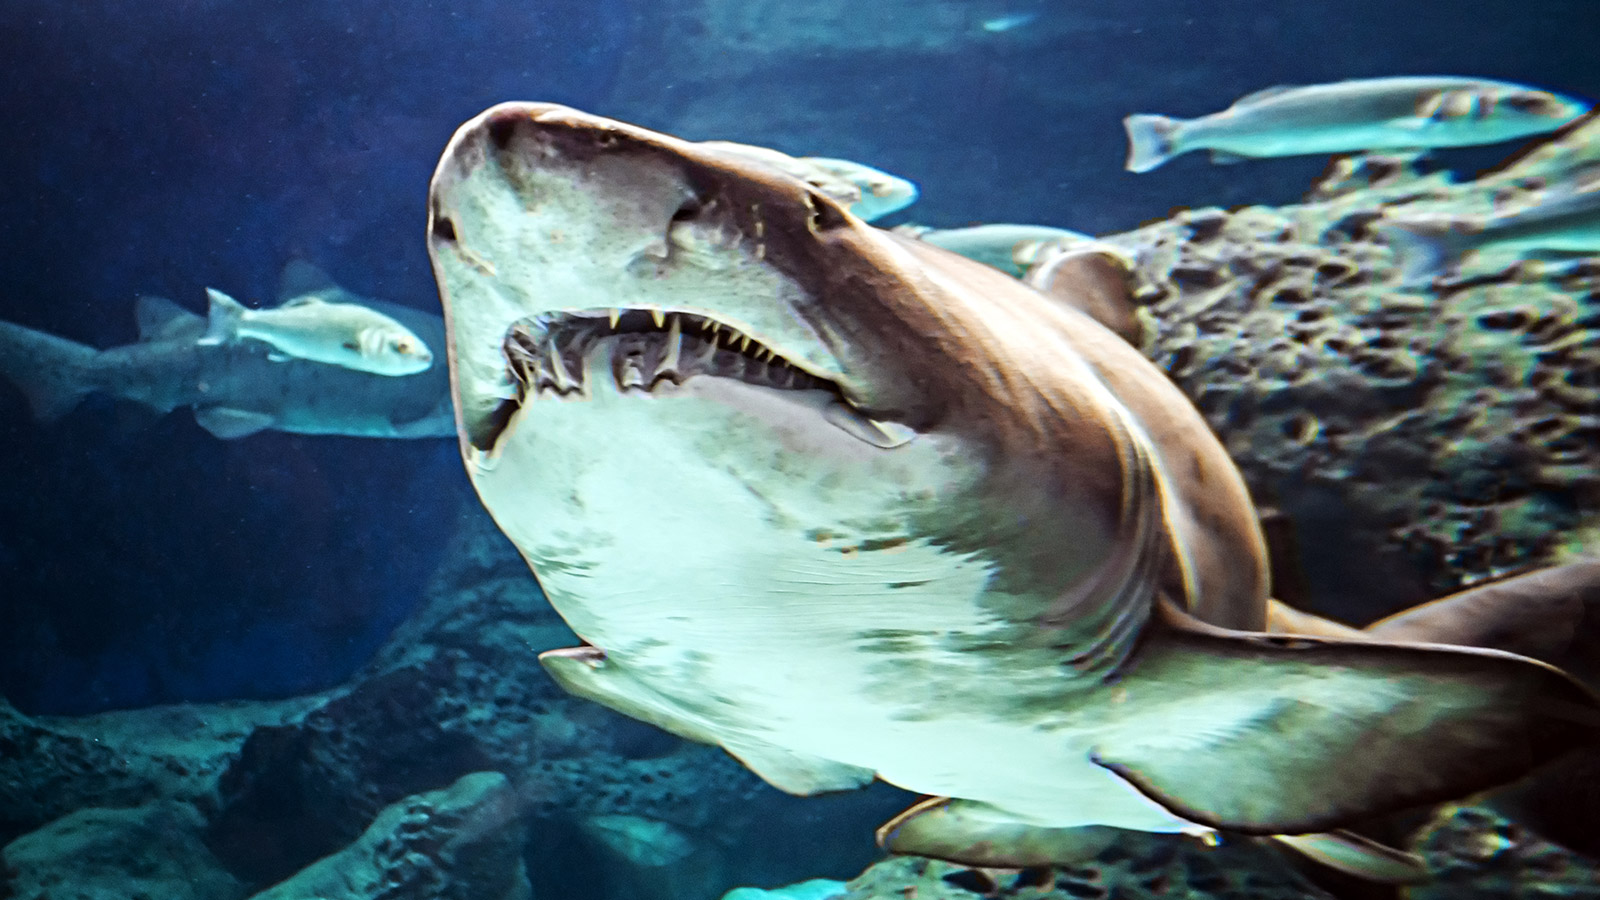 Skip the Shark Week mockumentaries and watch real sharks on these live cams instead.